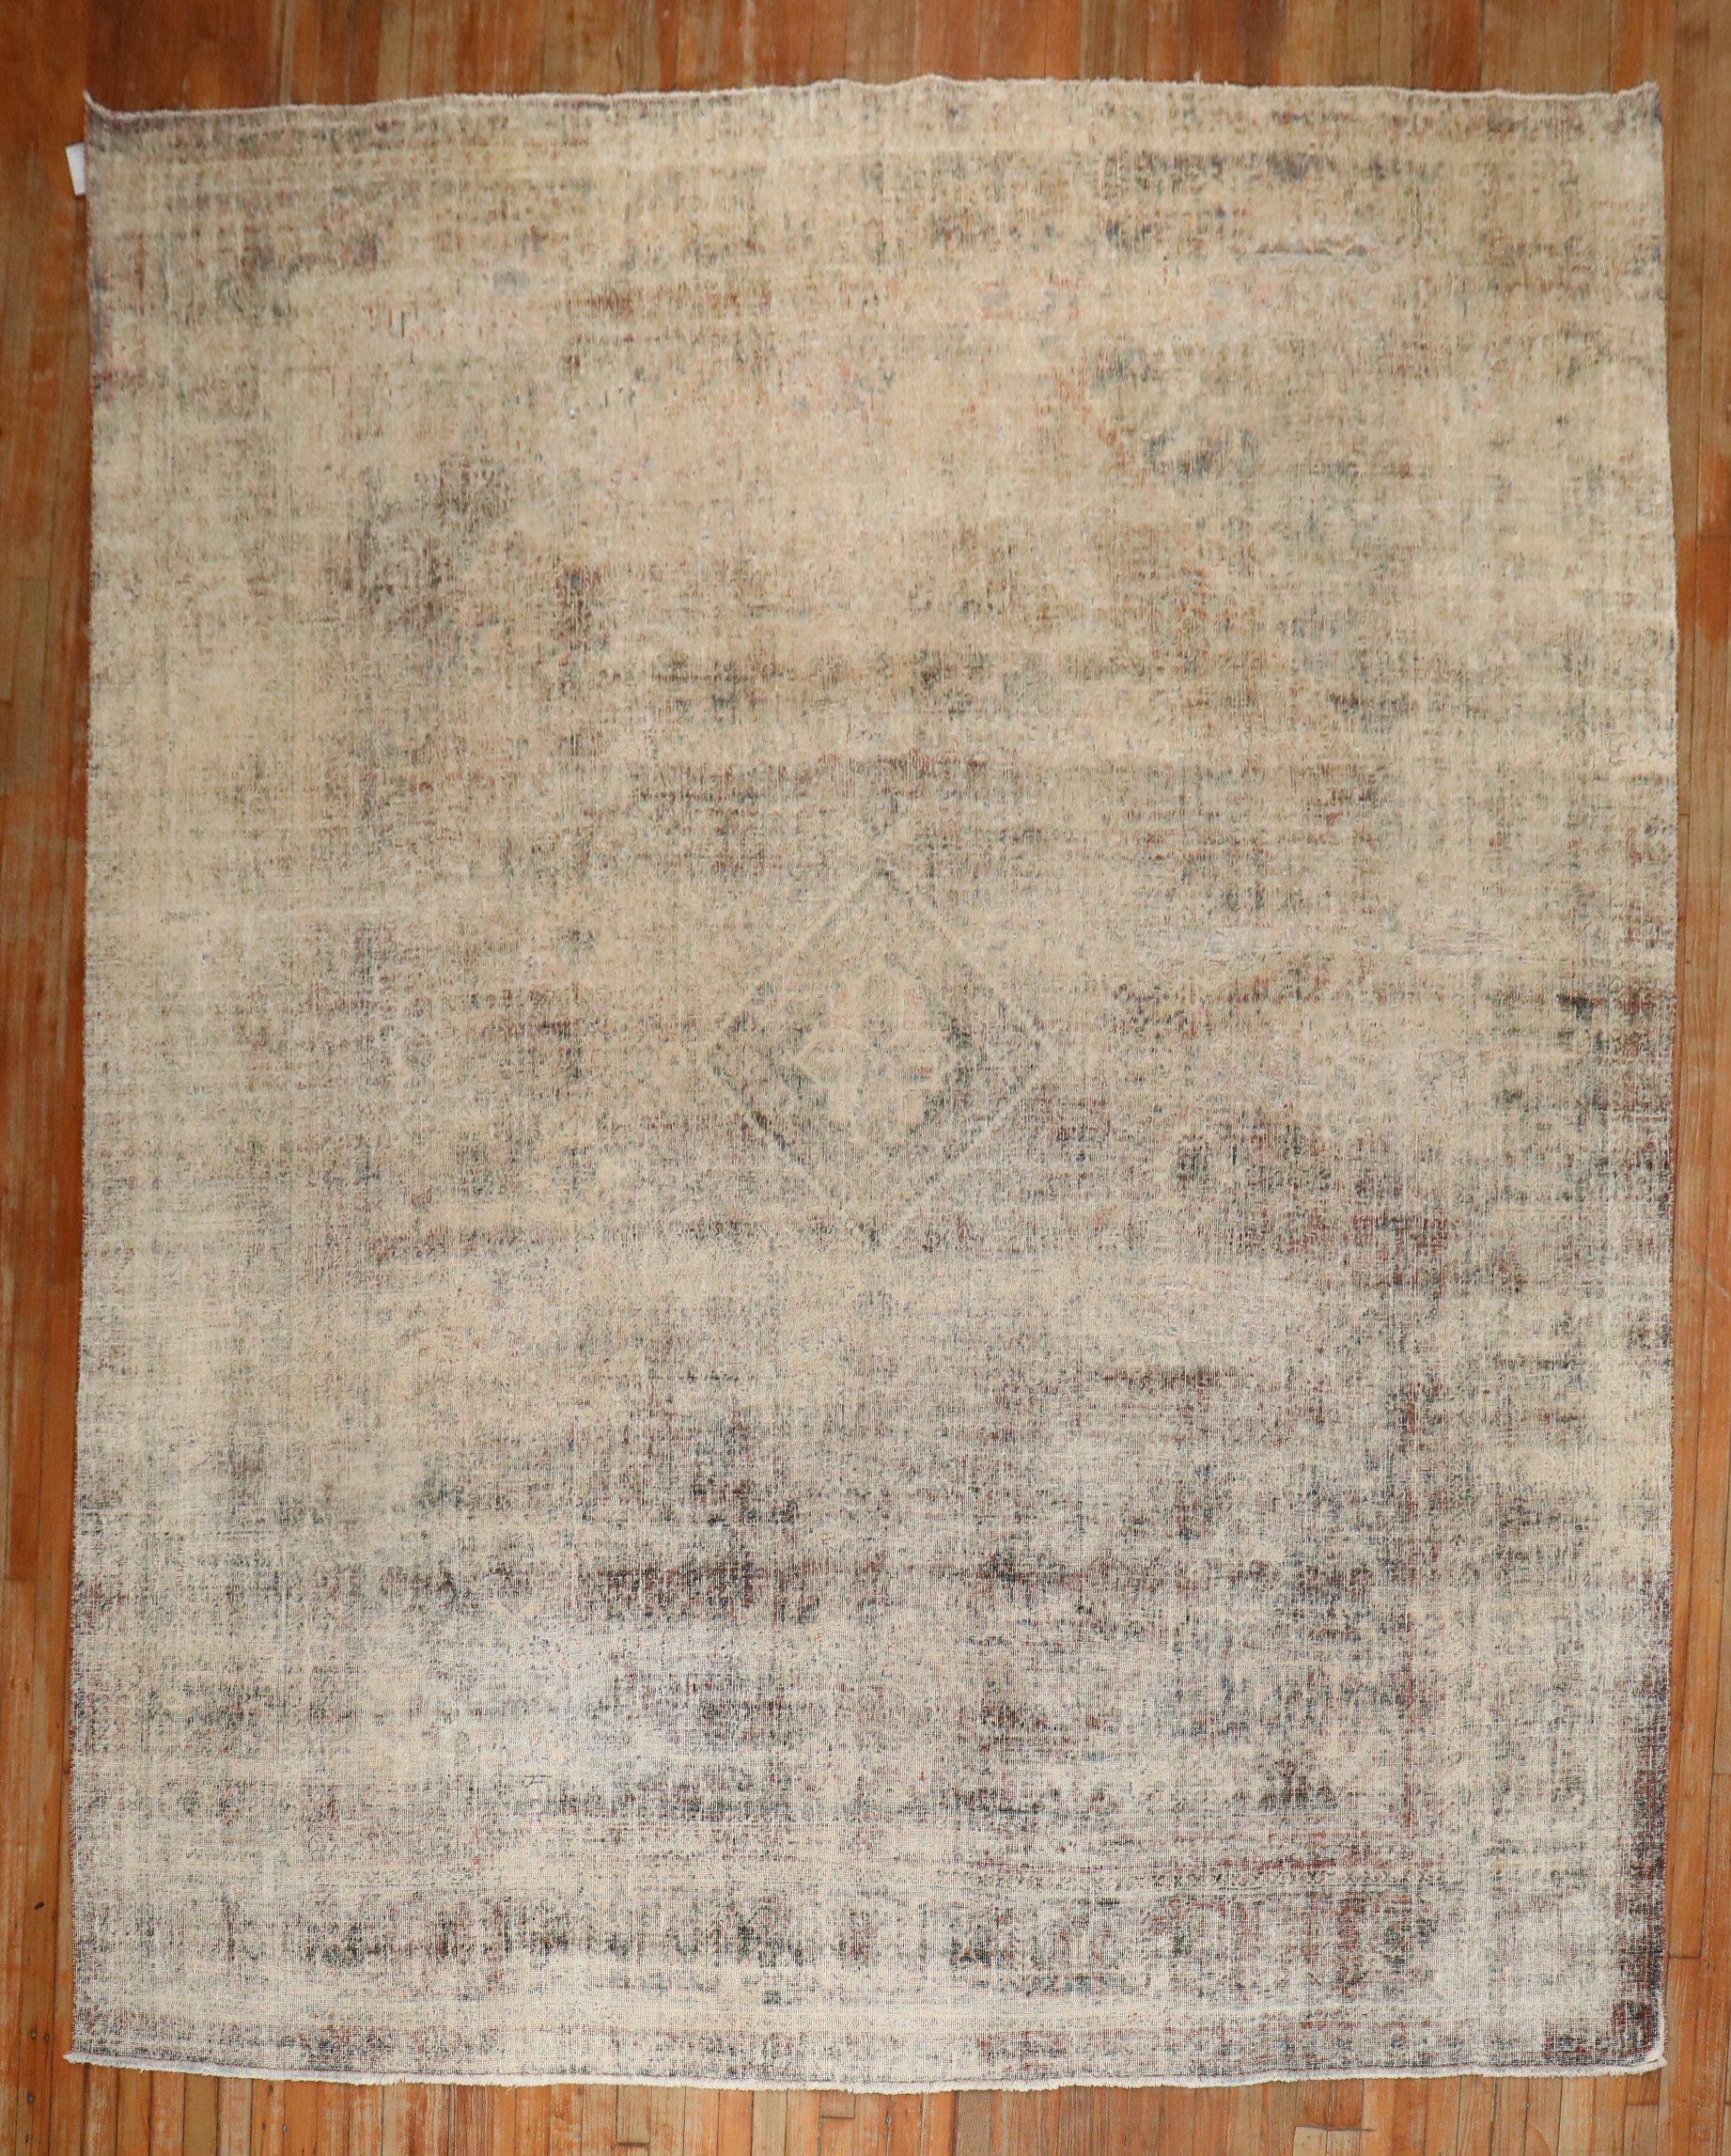 An early 20th century Persian Joshegan Rug that has been worn over the course of 100 years

Measures: 9' x 11'8''.